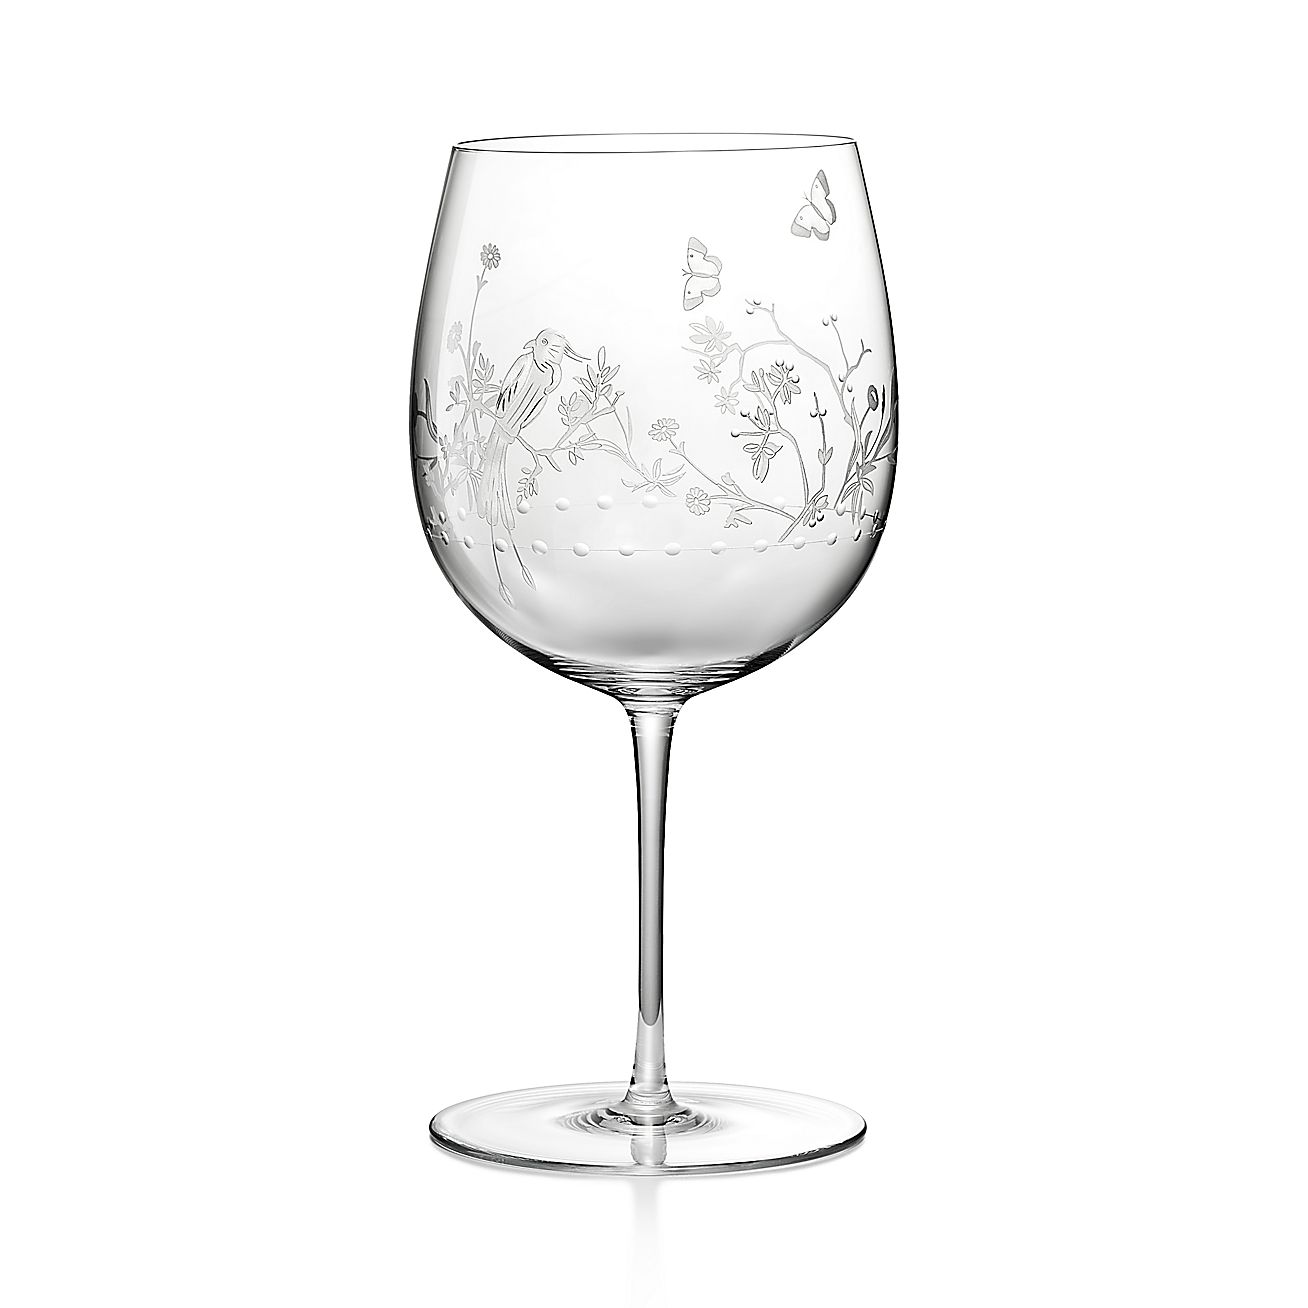 Tiffany Audubon Red Wine Glass in Hand-etched Glass